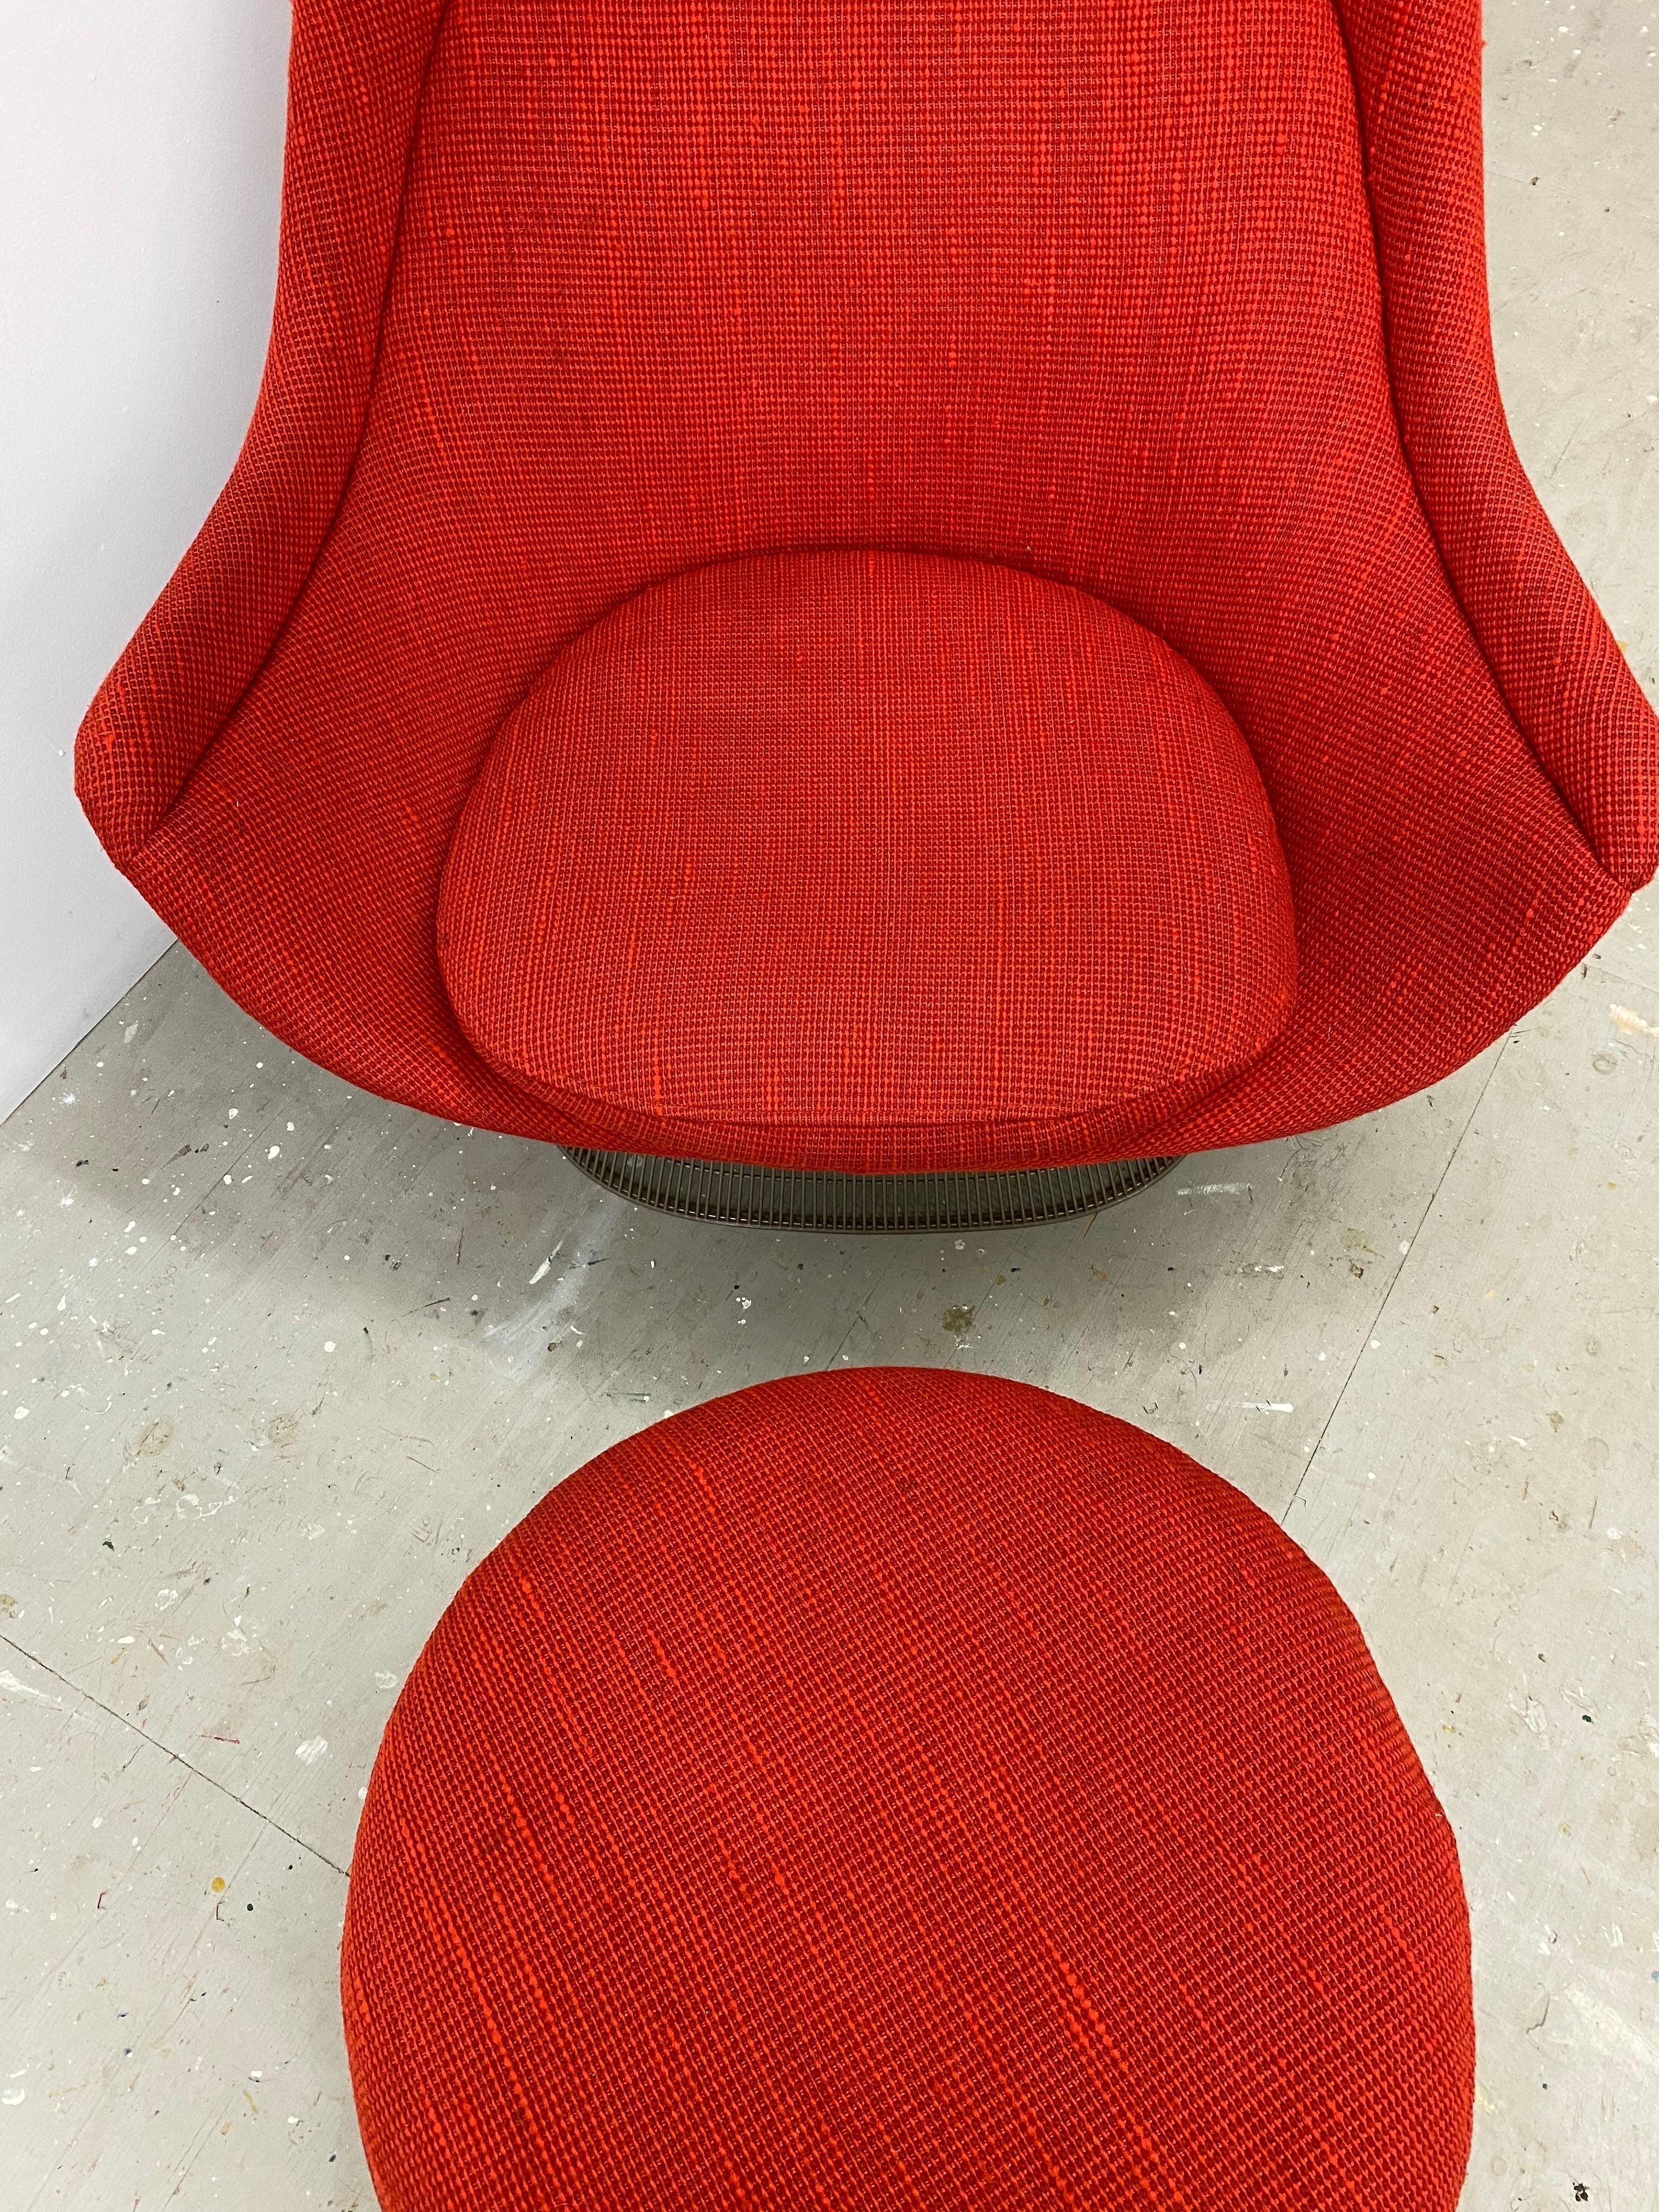 Warren Platner Easy Lounge Chair and Ottoman in Original Cado Red Fabric/ 1970 For Sale 3